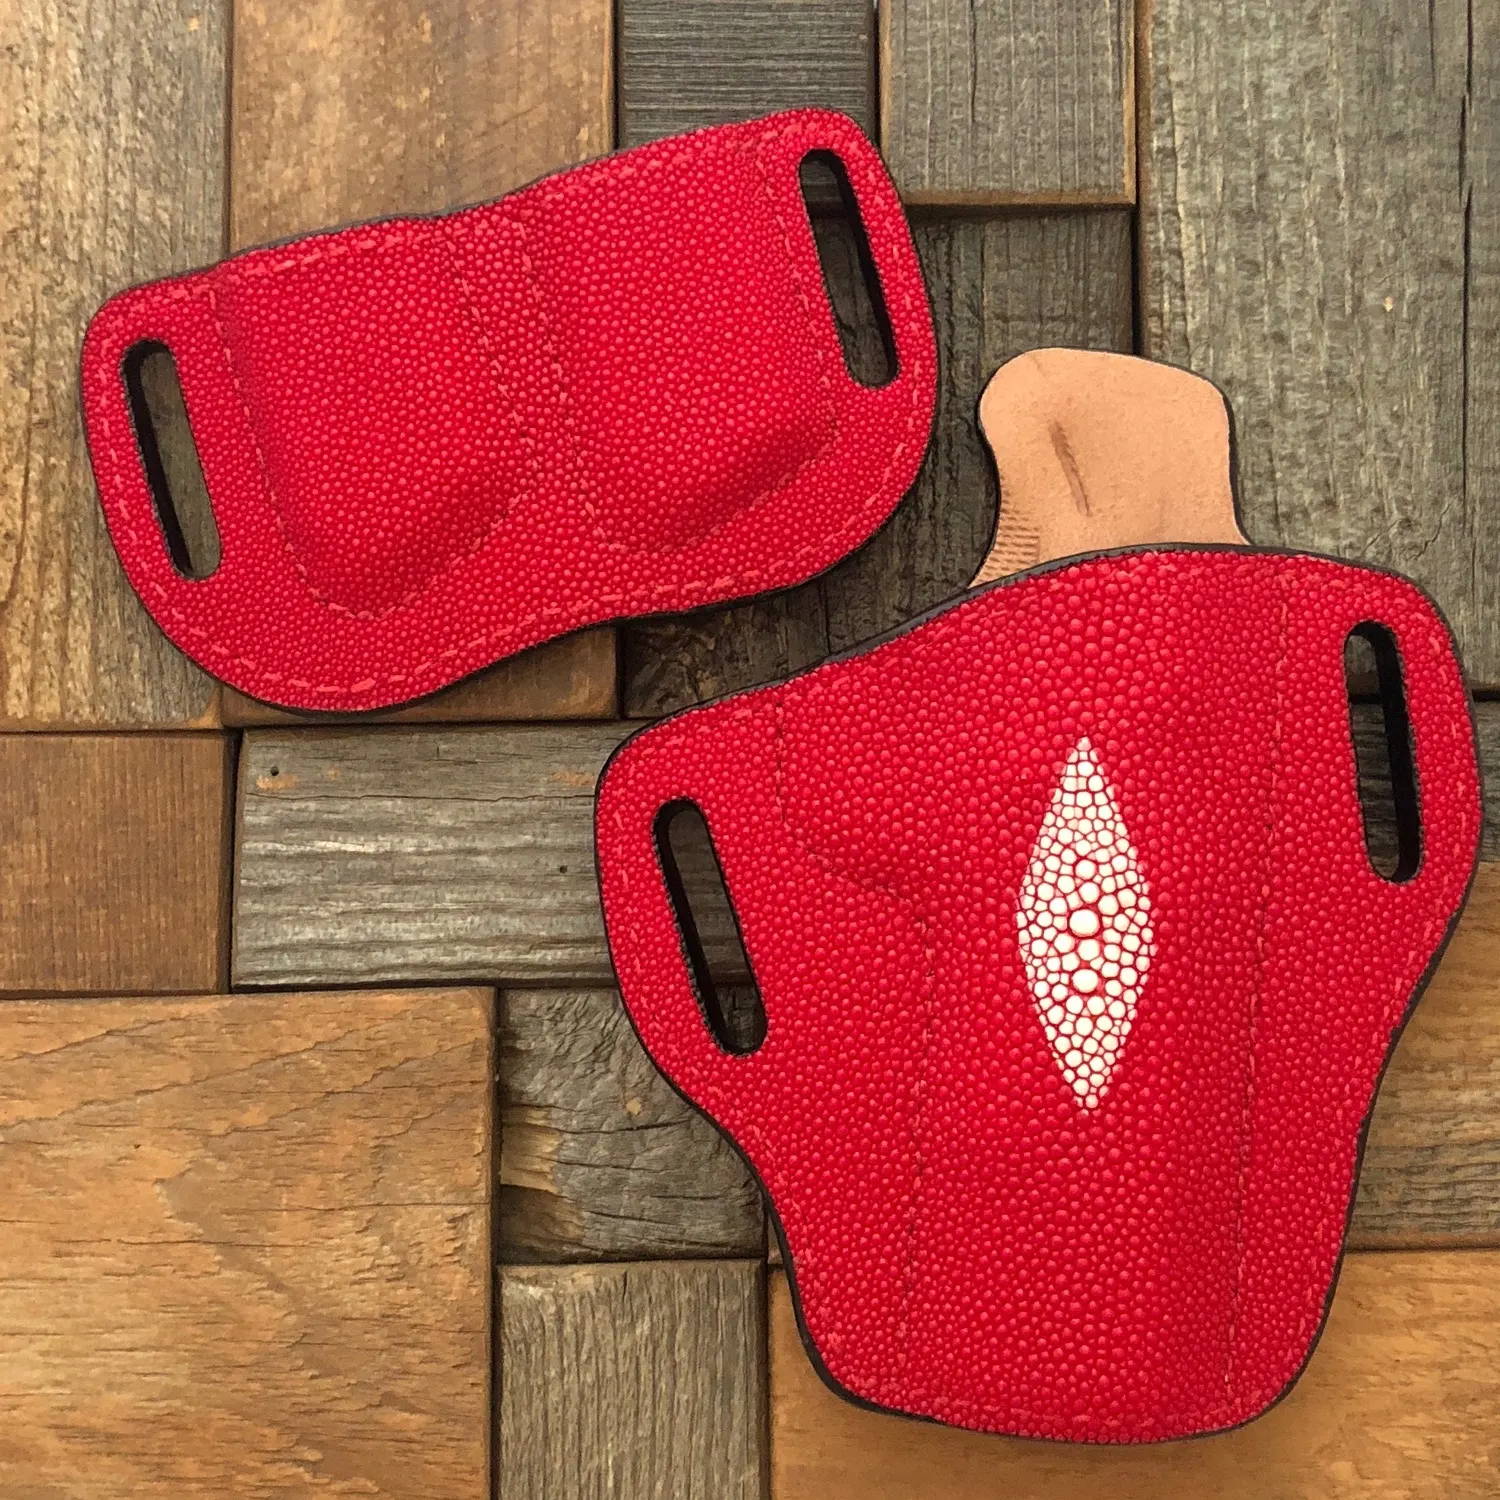 Custom concealed carry holster